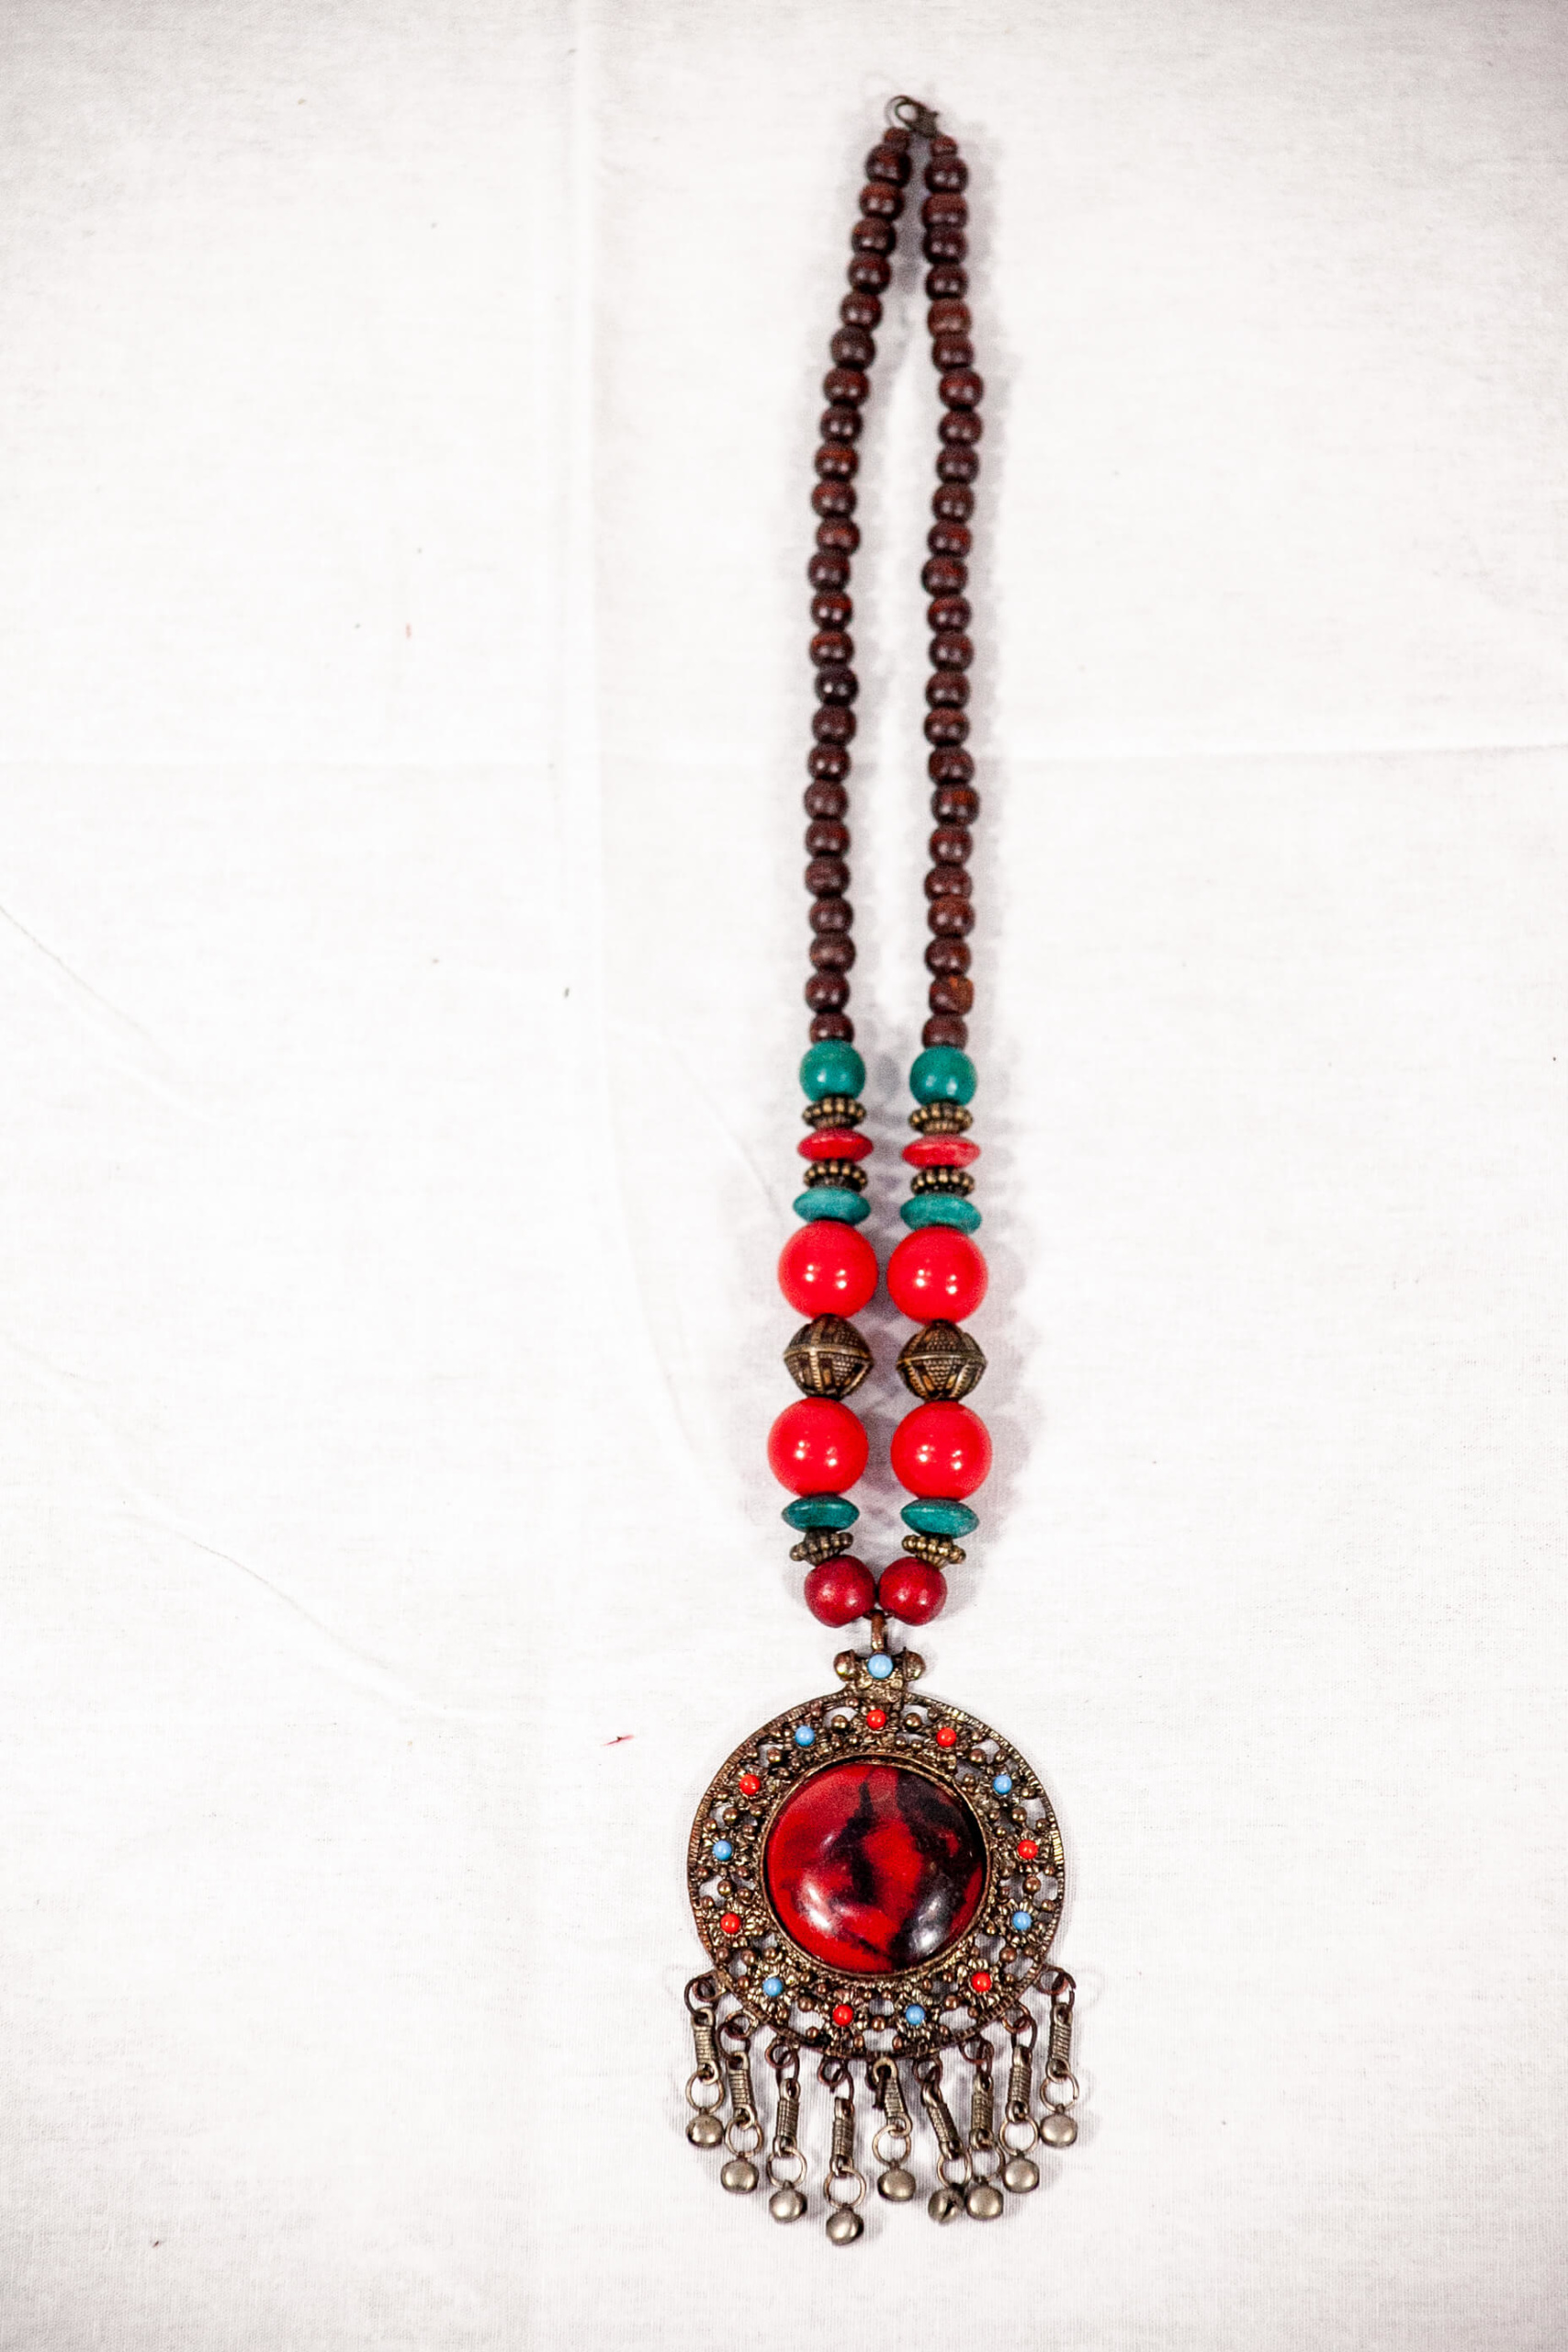 Homemade Round Red Necklace